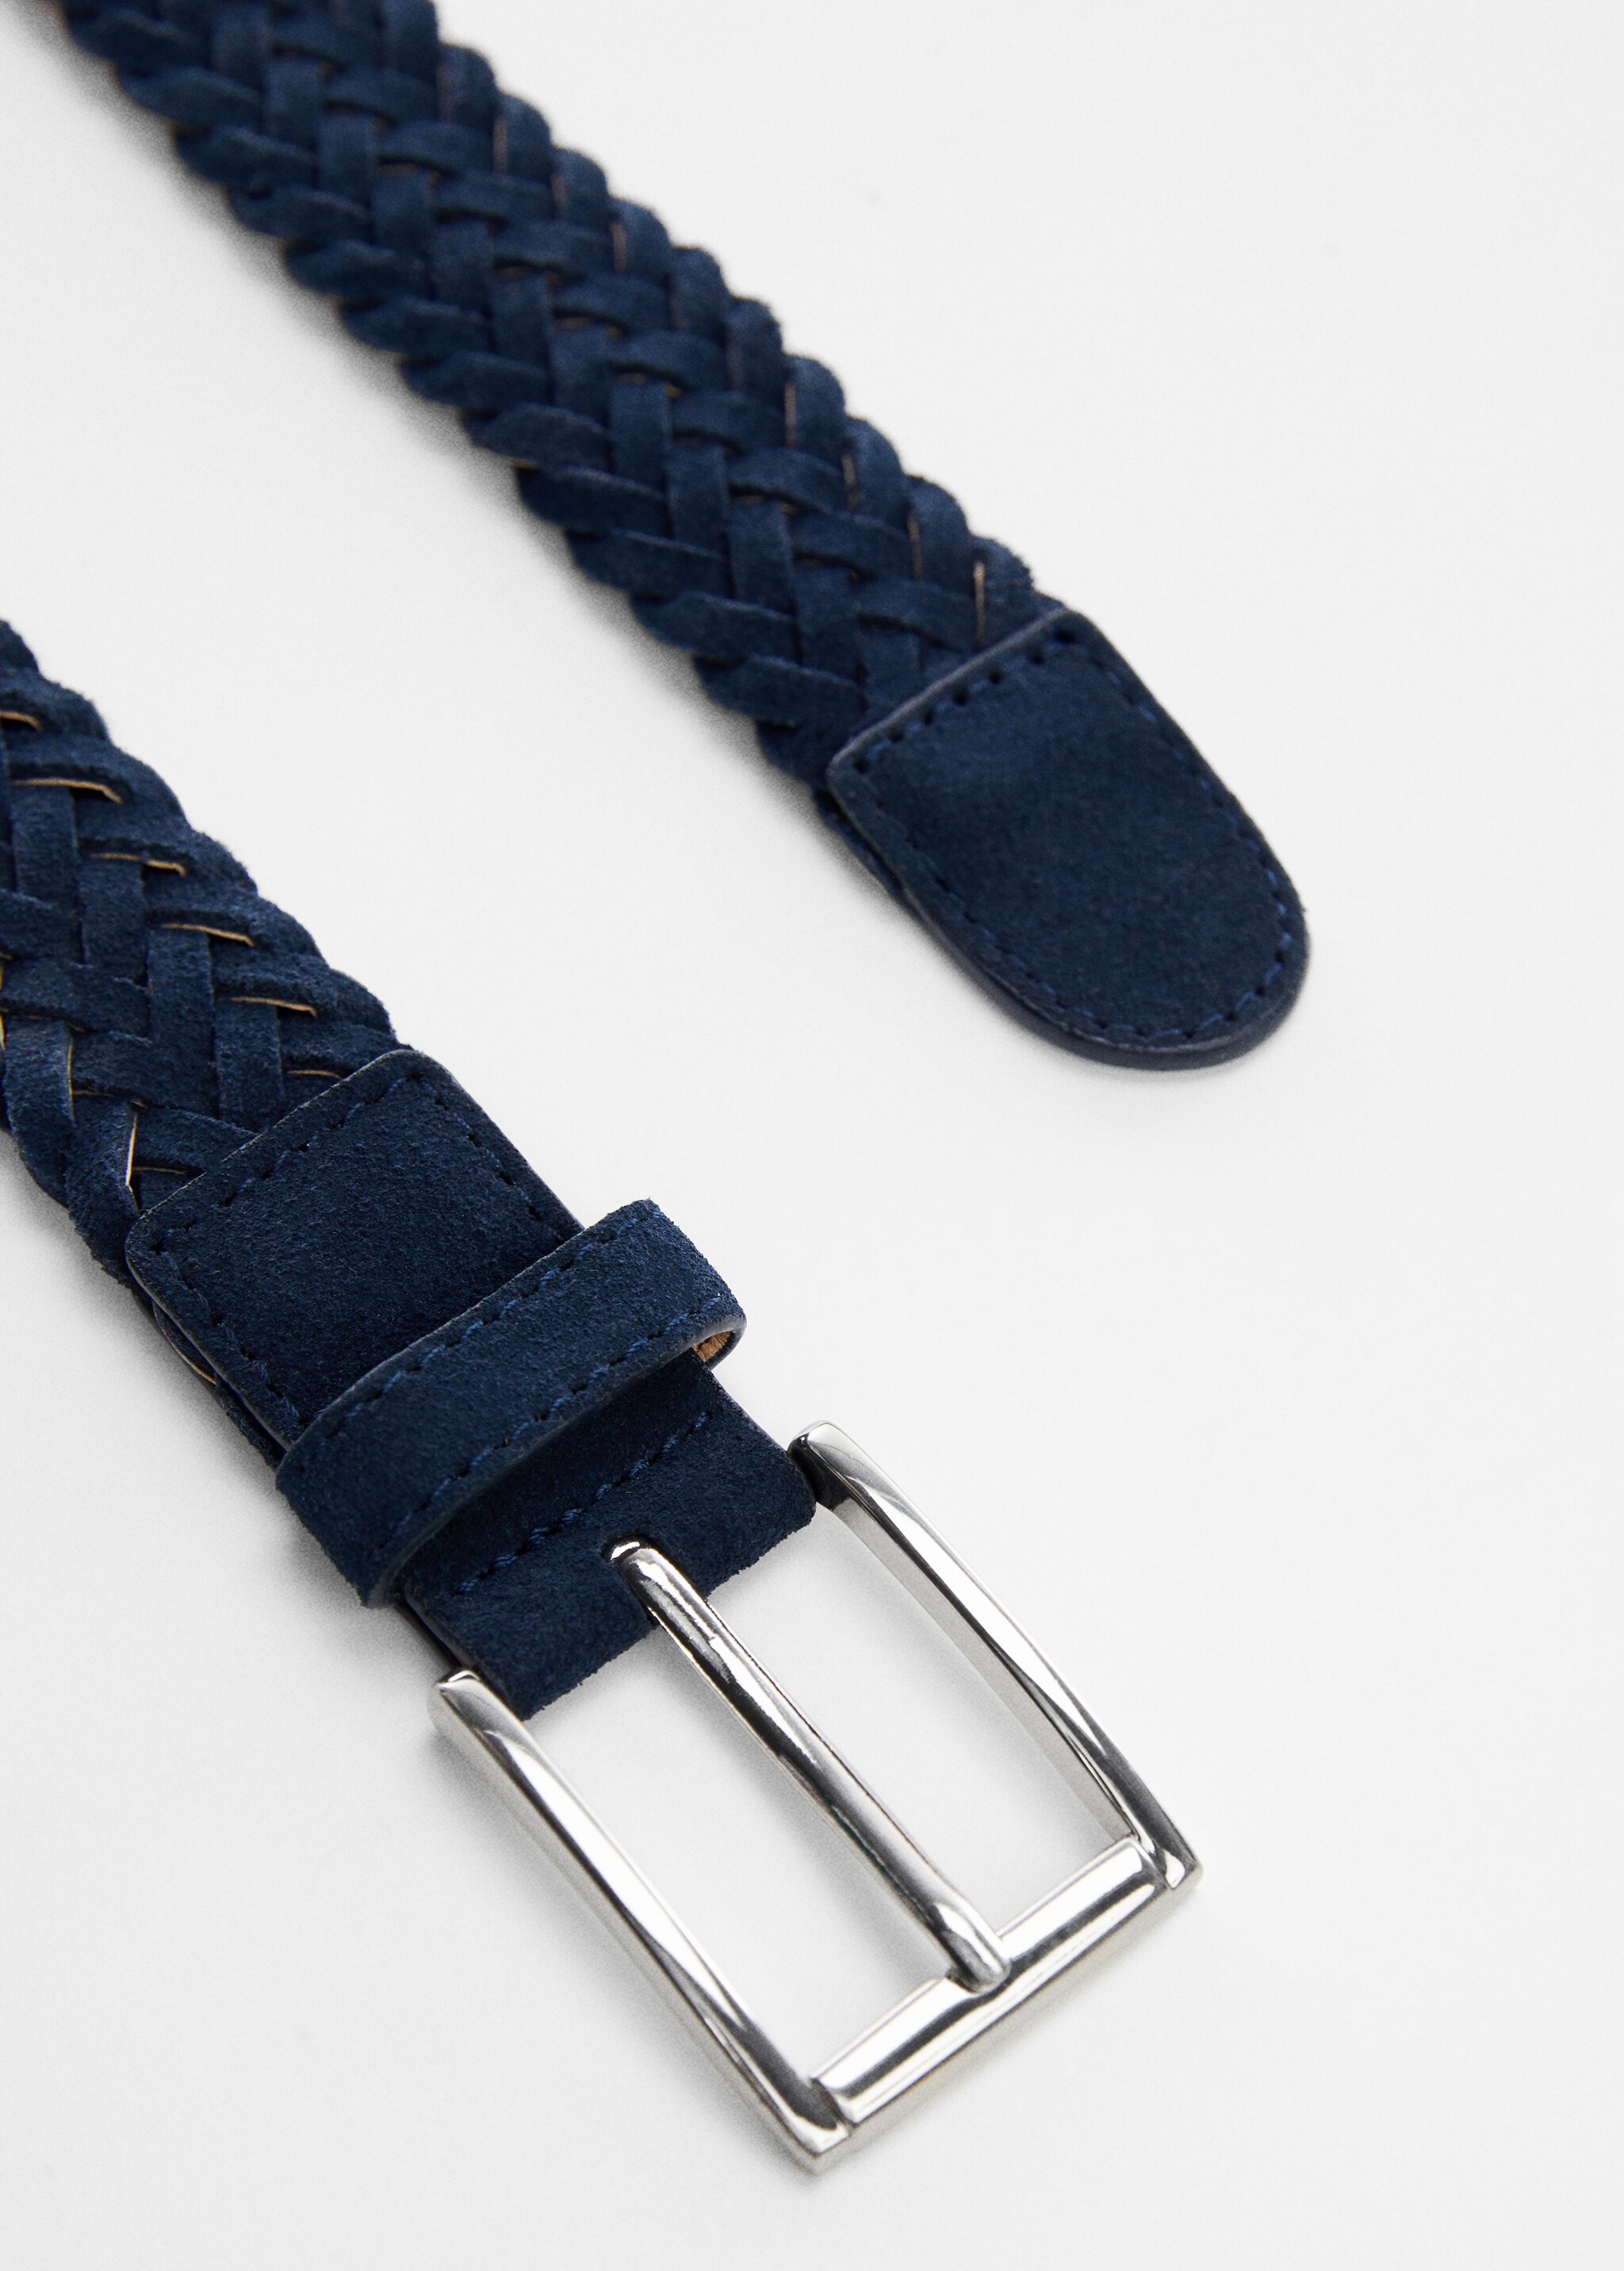 Braided suede belt - Details of the article 1